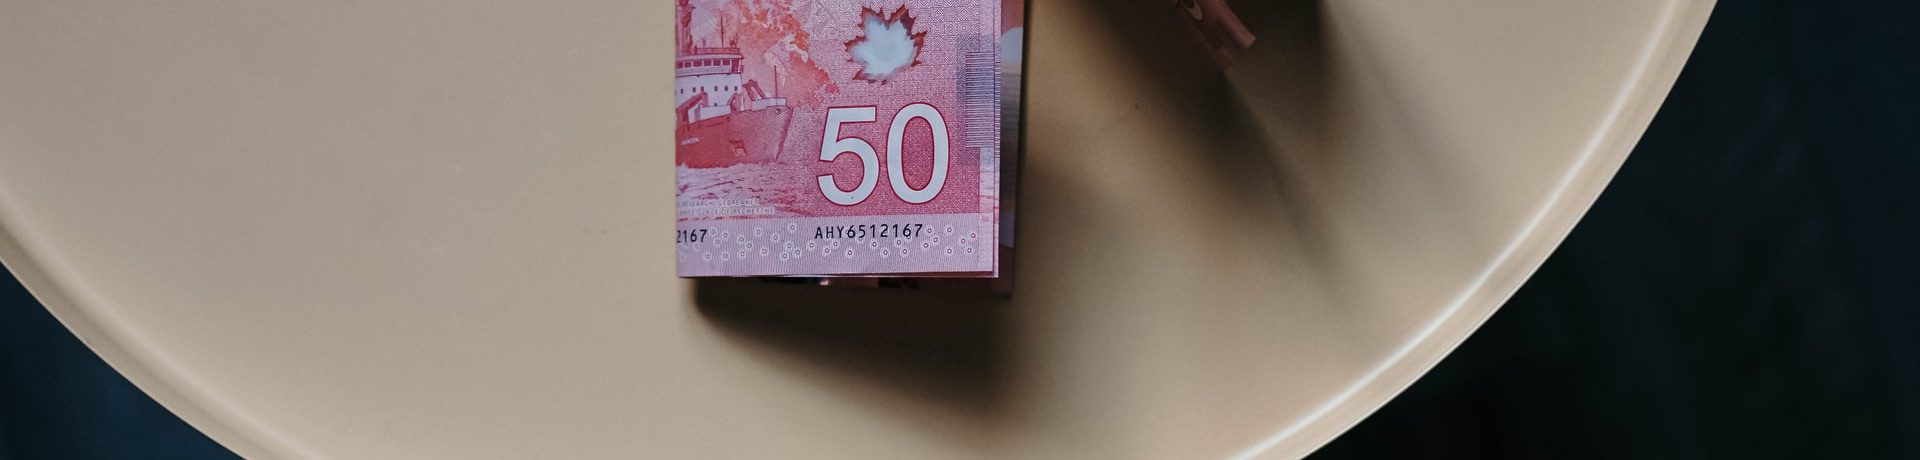 Canadian $50 bills on a white table